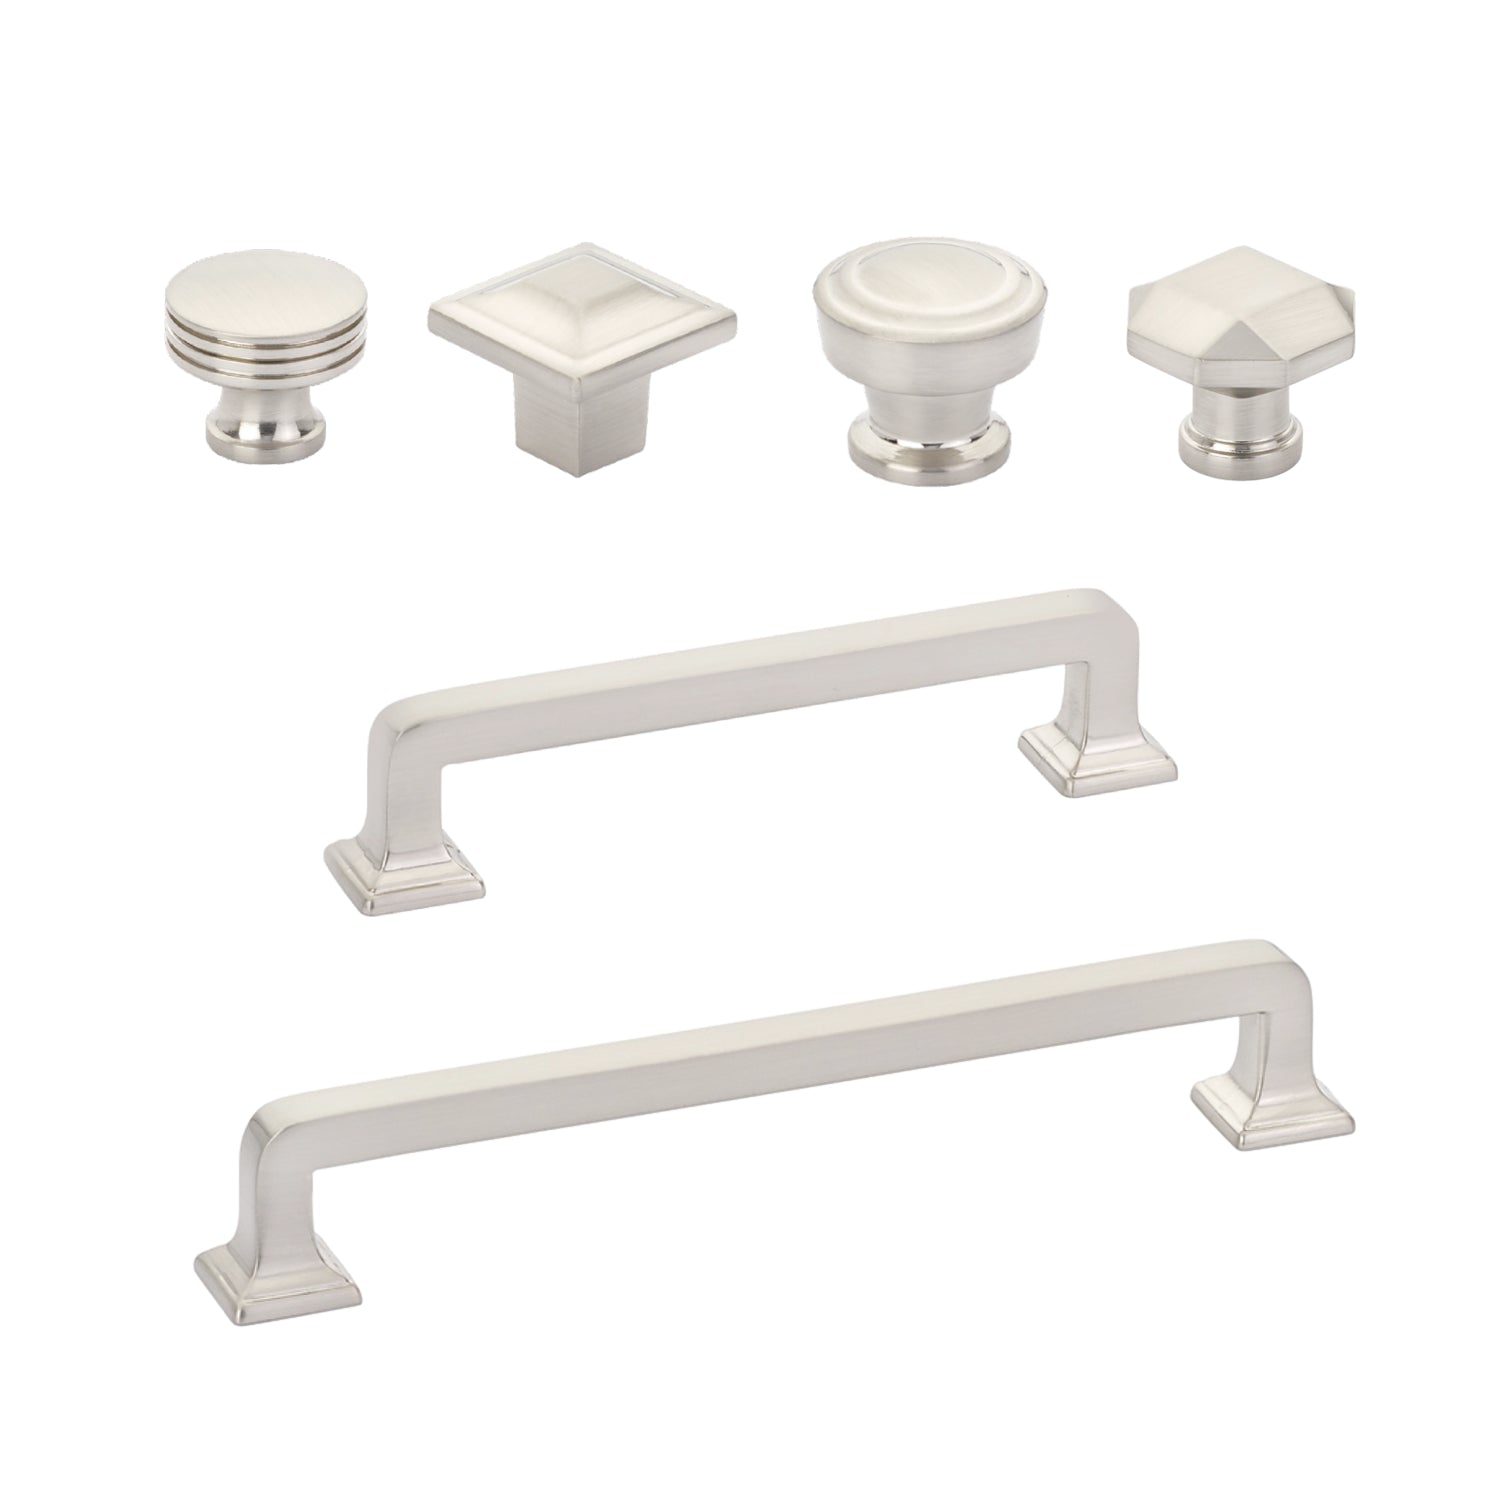 Brushed Nickel Moderna Cabinet Drawer Pulls and Cabinet Knobs